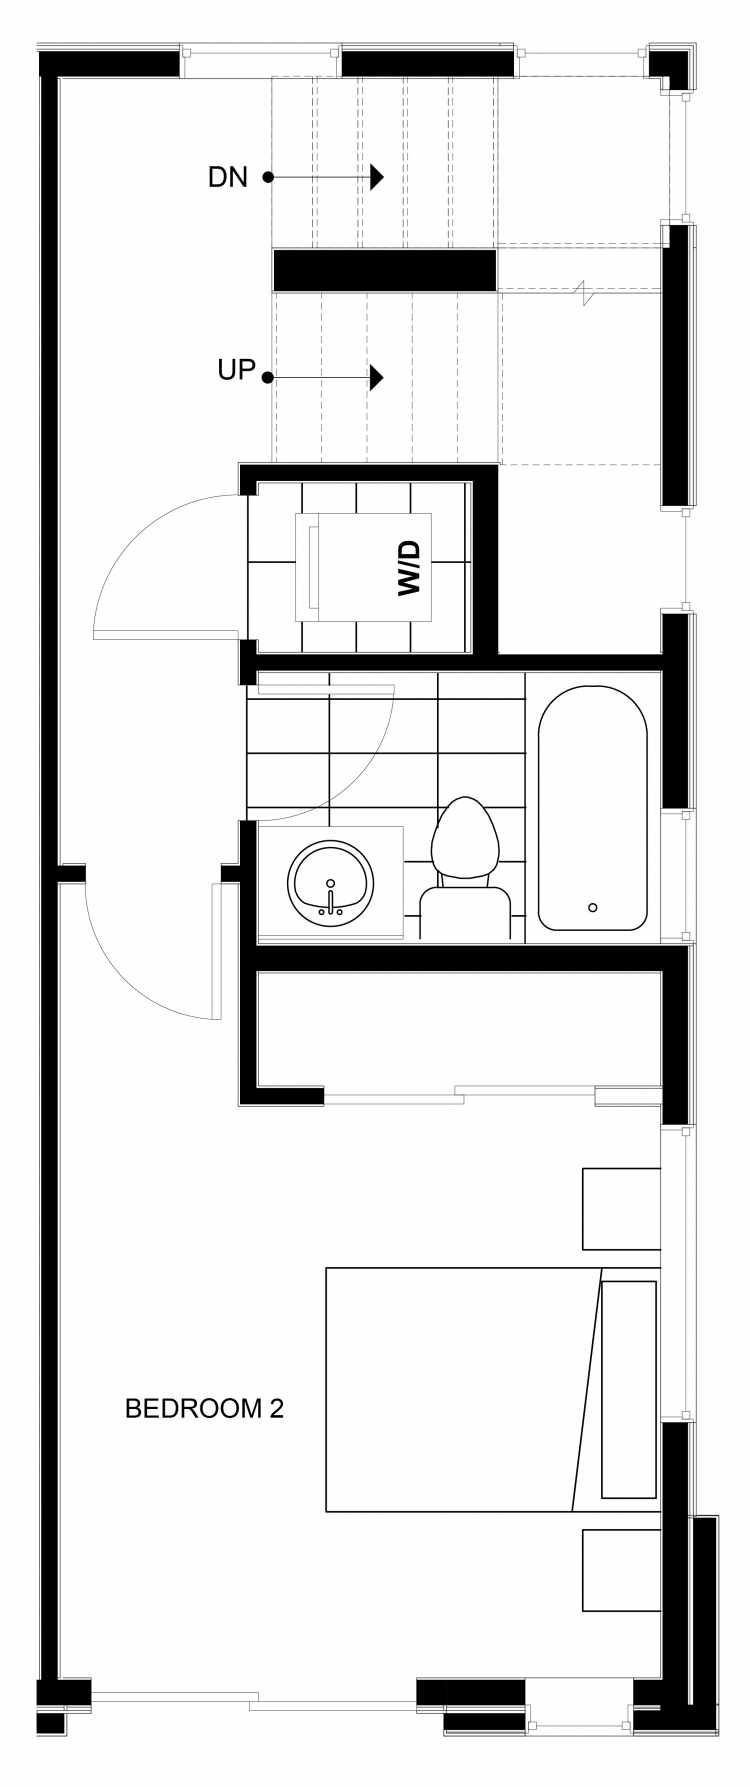 Third Floor Plan of 1538 15th Ave E, One of the Larrabee Townhomes in Capitol Hill